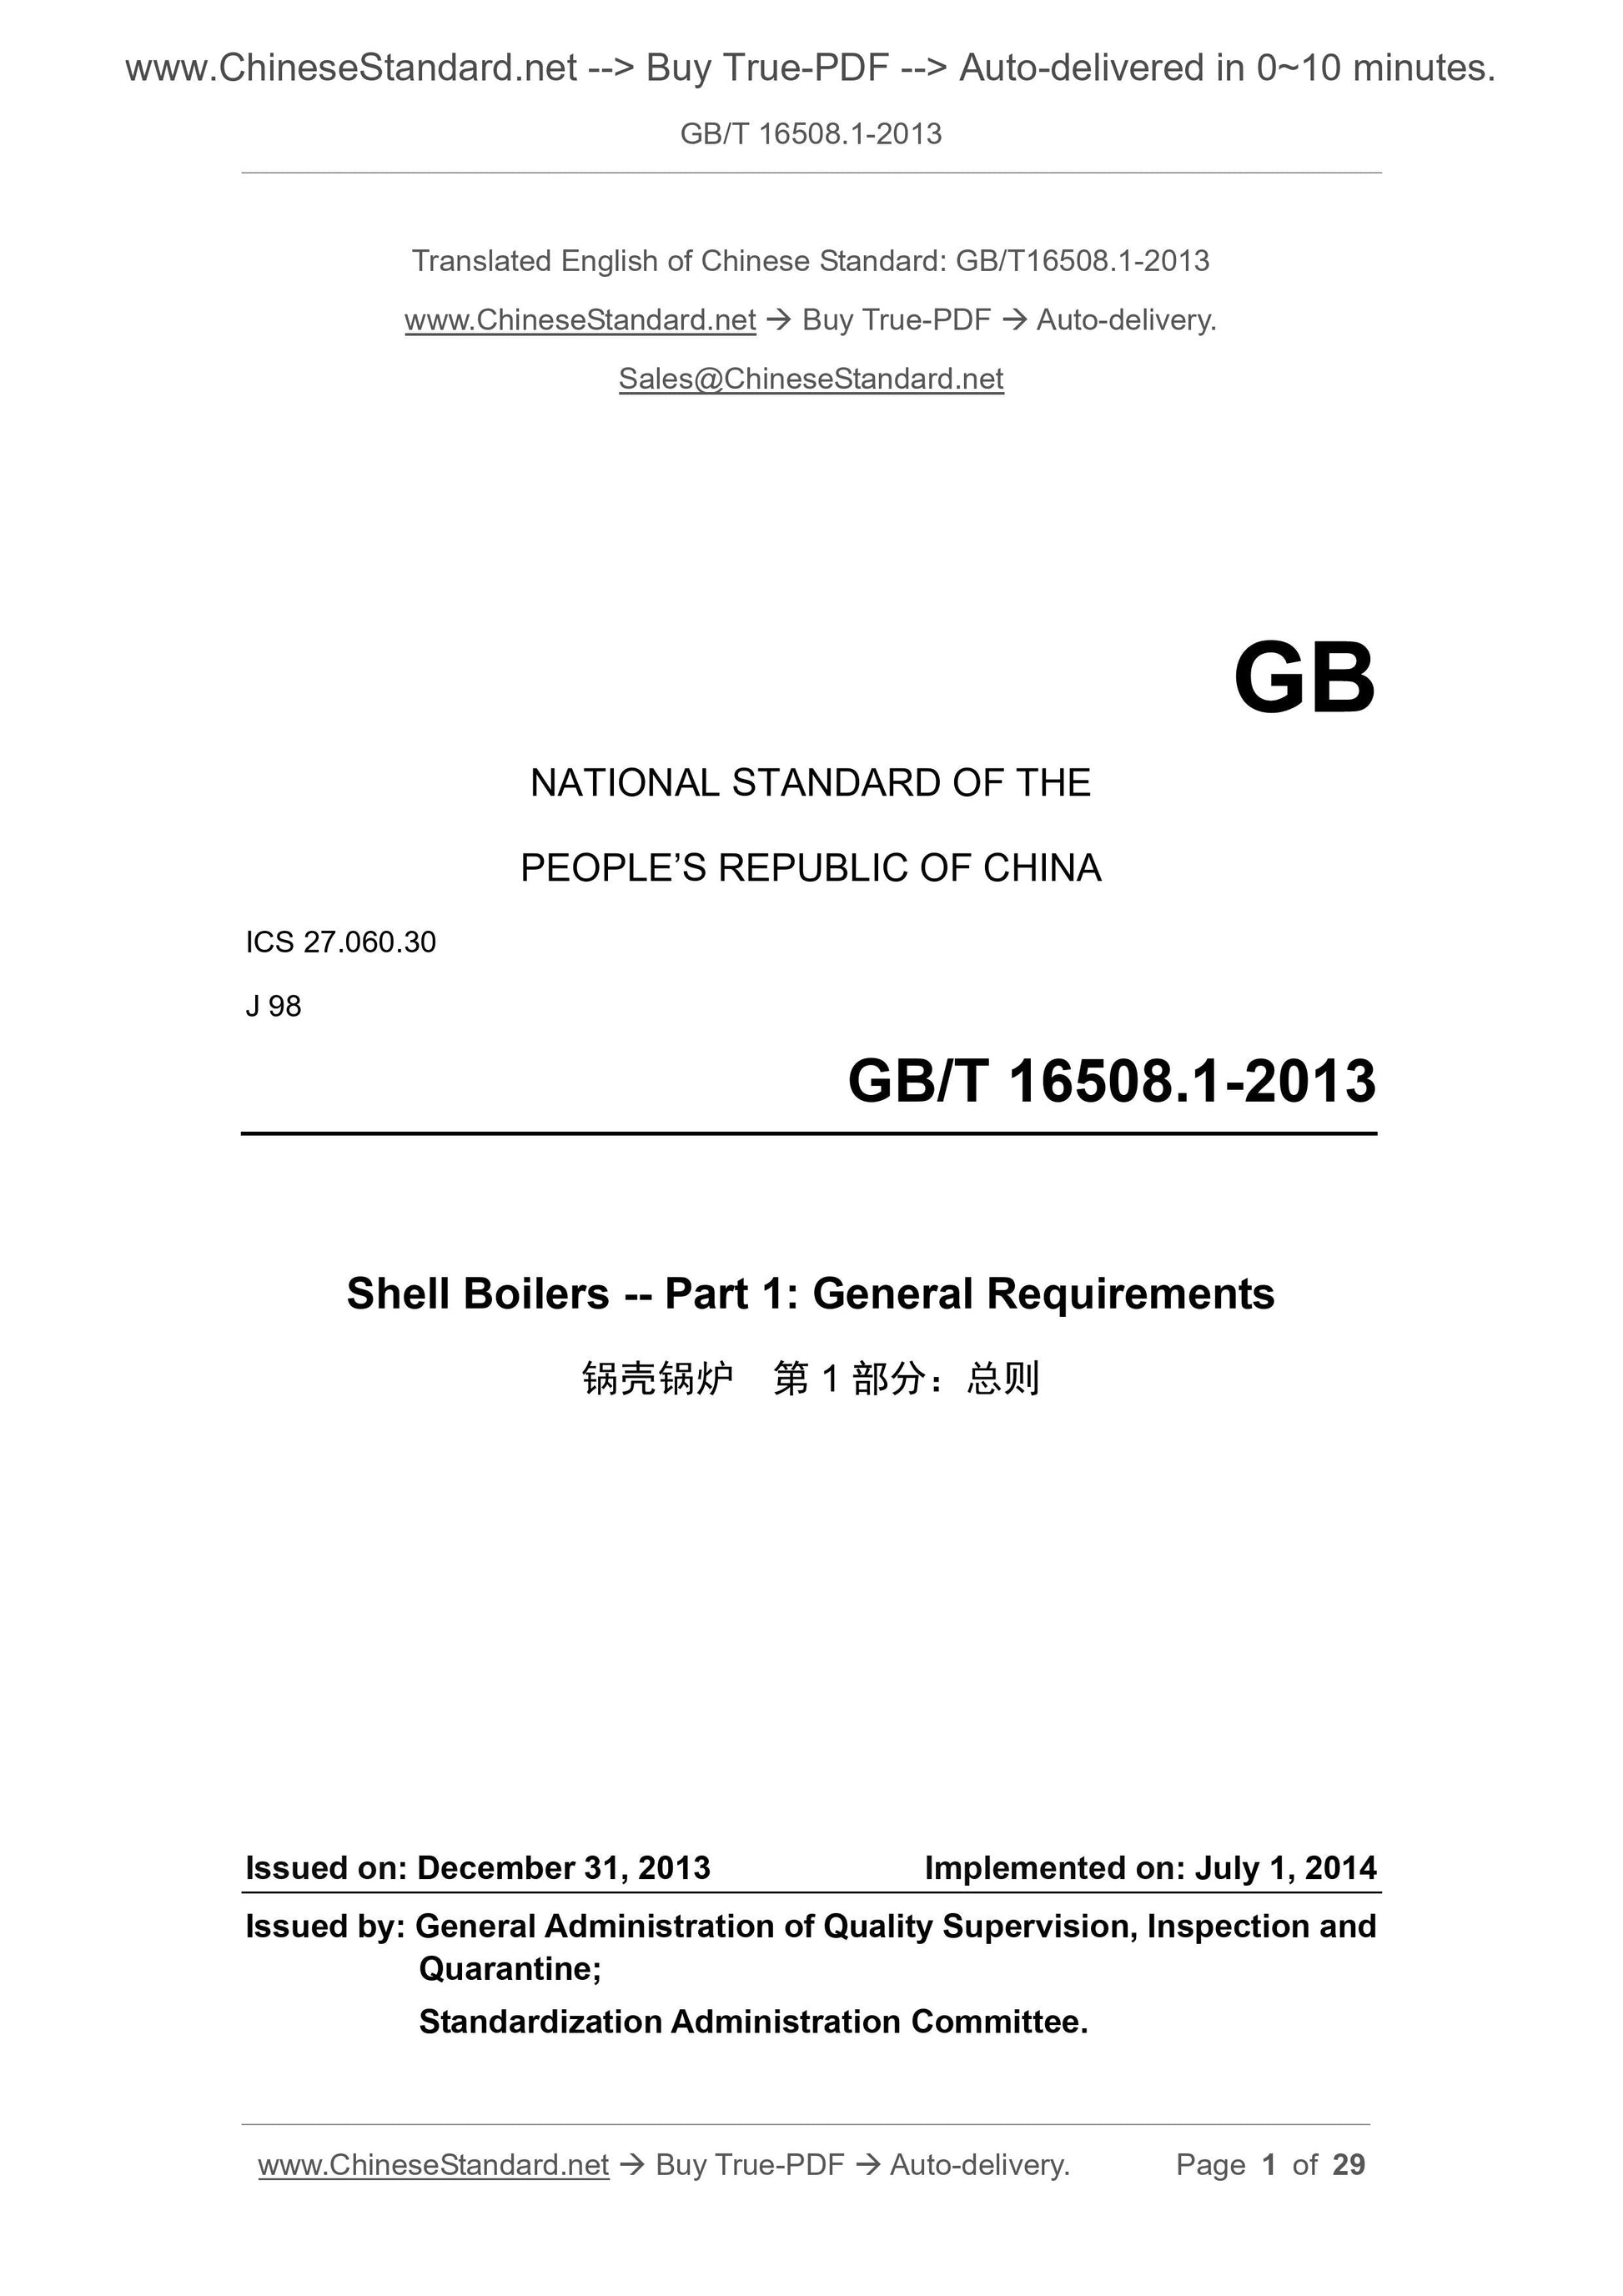 GB/T 16508.1-2013 Page 1